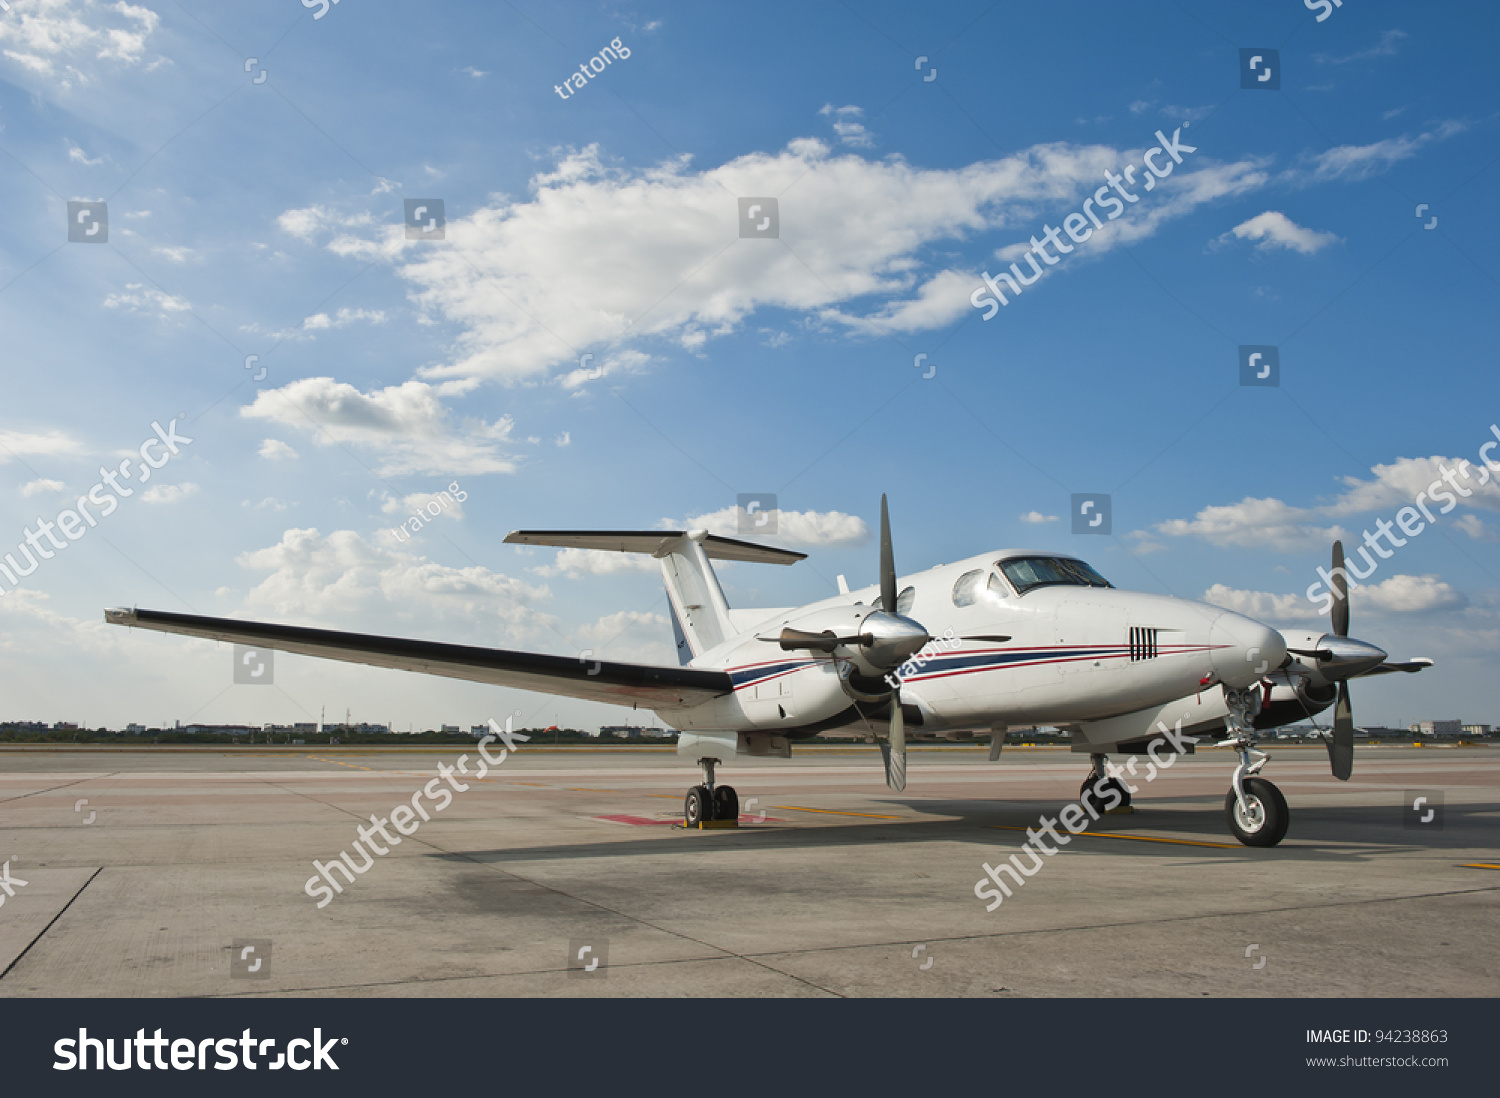 Propeller plane parking at the airport #94238863